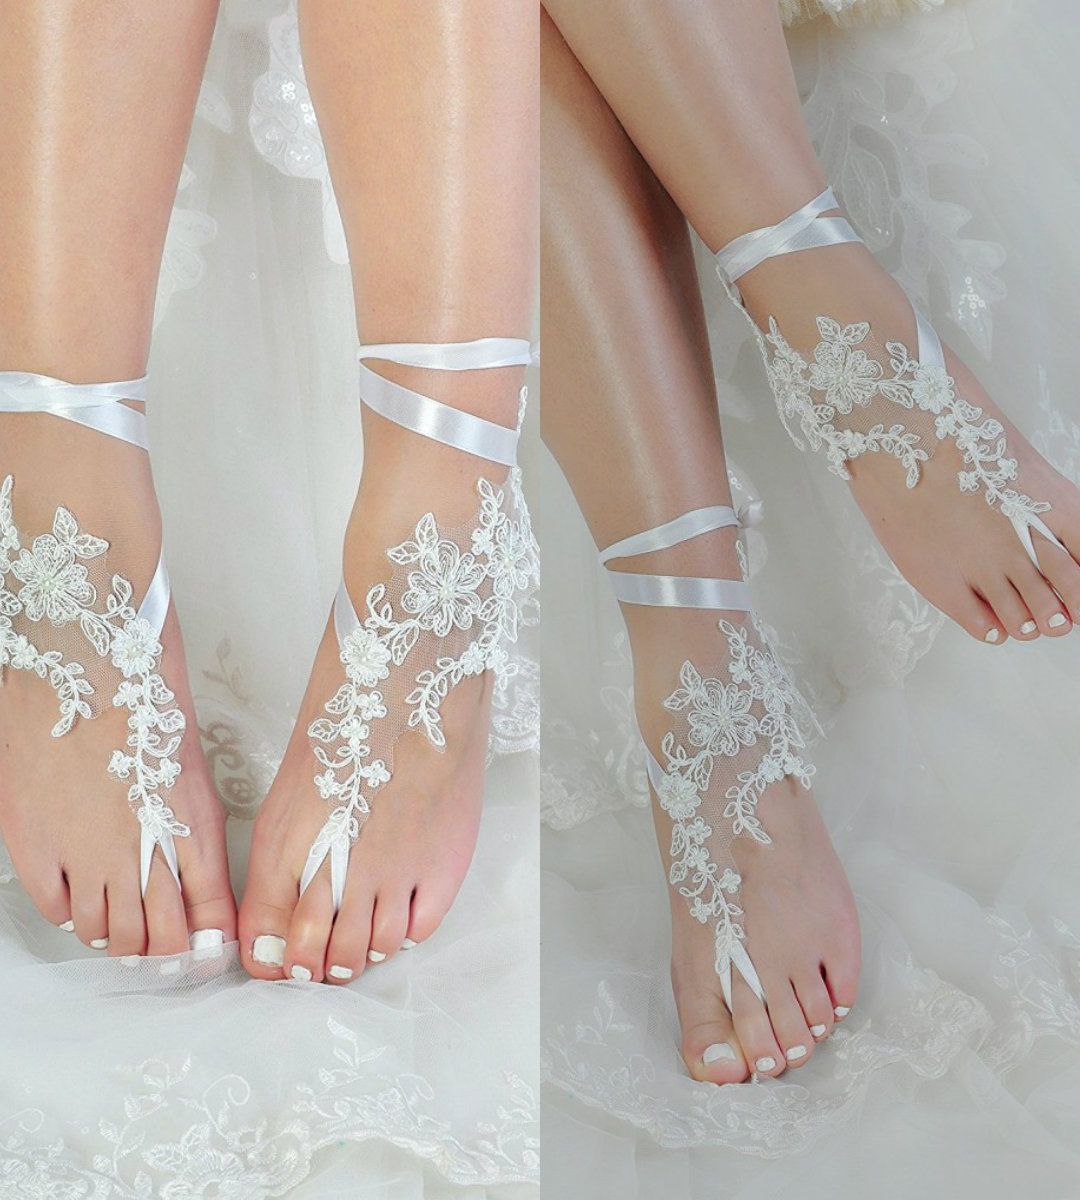 Gorgeous Ribbon Beach Wedding Shoes Delicate Beads Open Toe Ankle Strap Flat Bridal Shoe For Summer Wedge Shoe White Bridal Shoes From Huifangzou